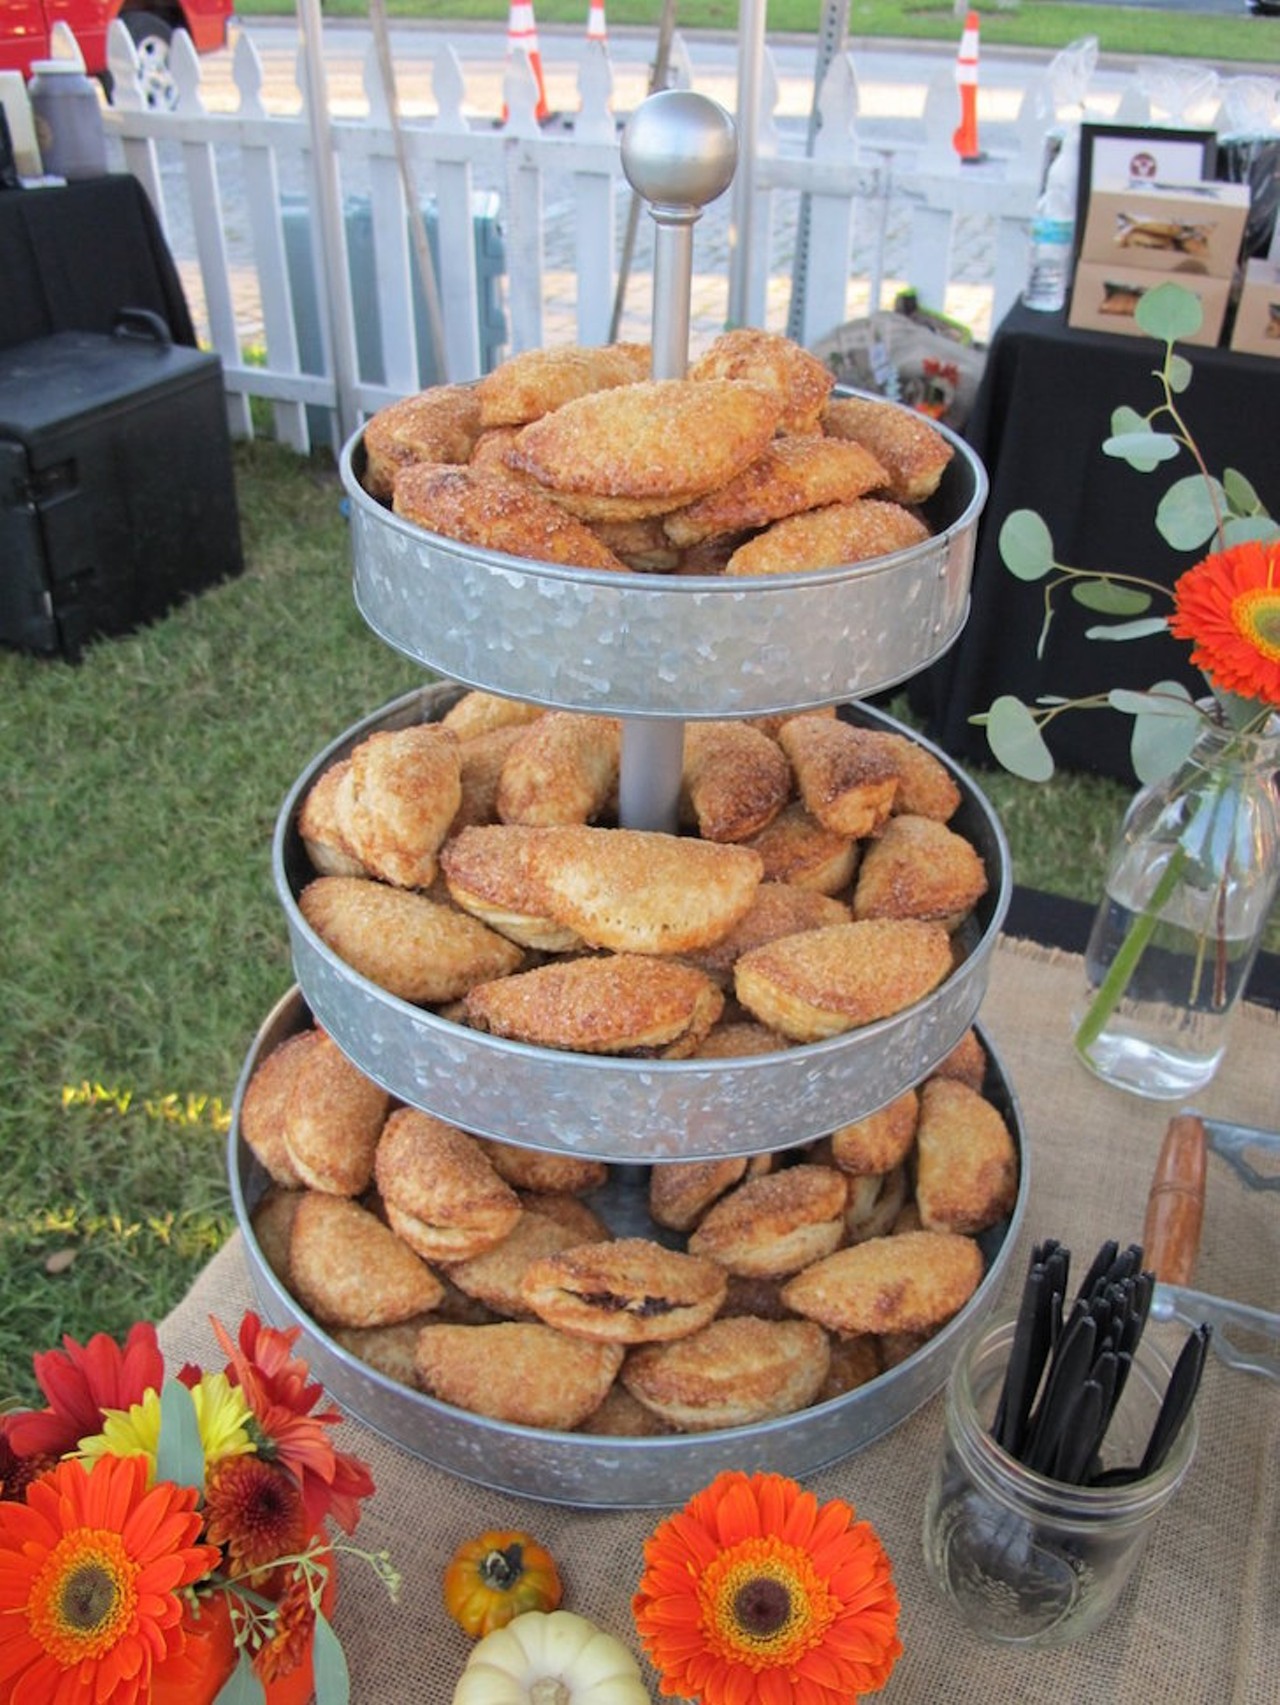 Tower of salted caramel apple pies and bourbon chocolate pecan hand pies (P Is For Pie)